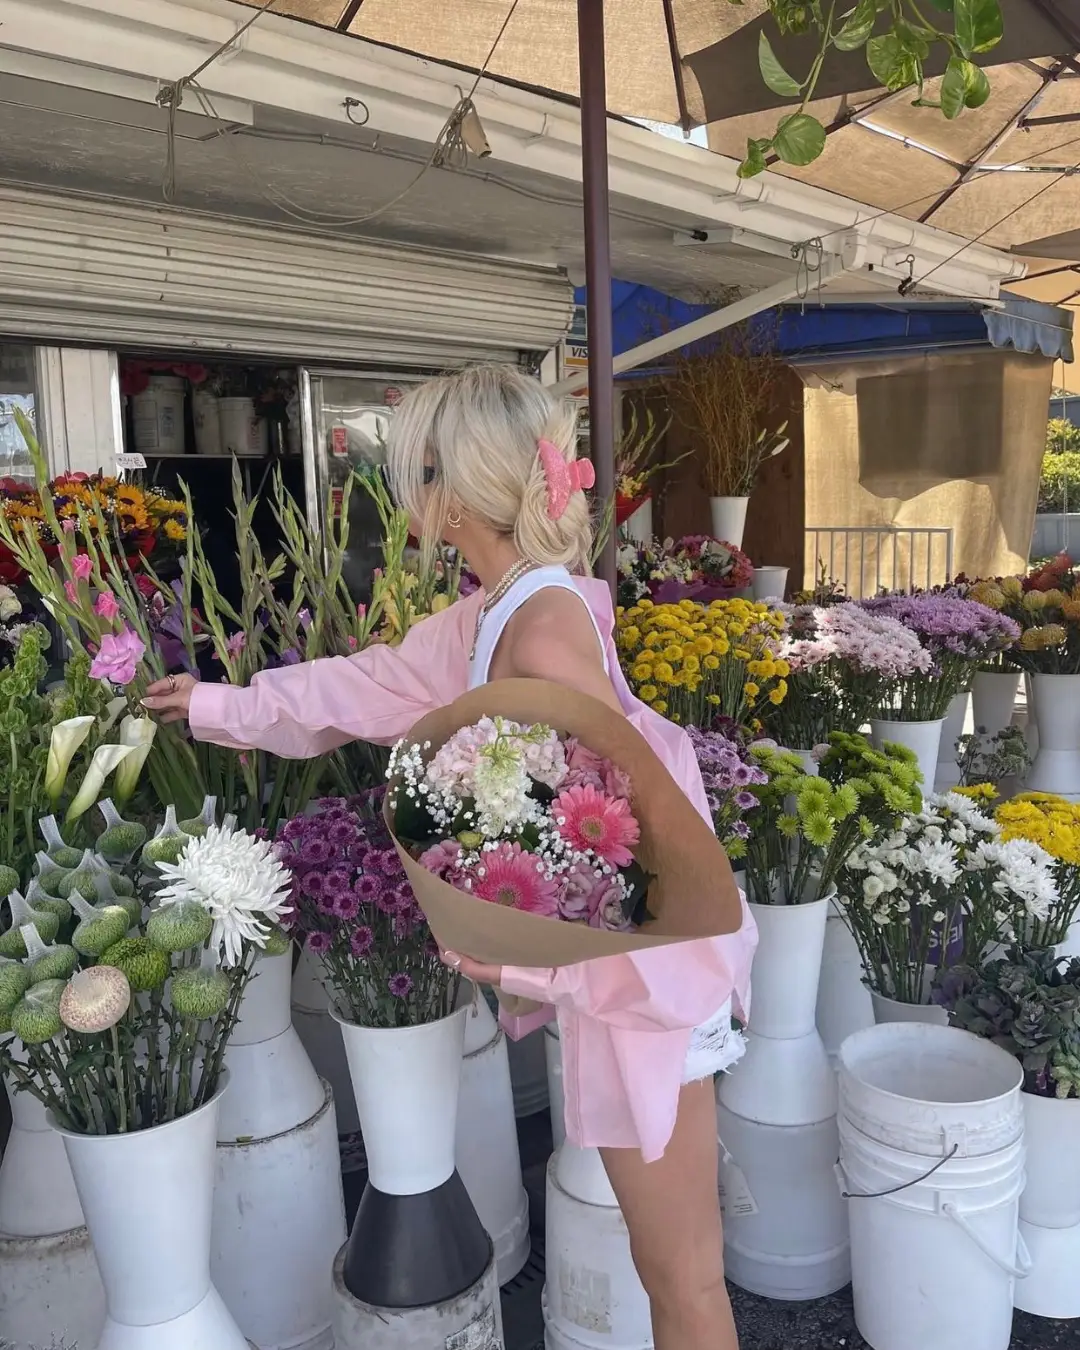  A woman in a pink dress is standing in front of a flower display. She is reaching out to pick flowers from the vases. The vases are filled with flowers and are arranged in a visually appealing manner.